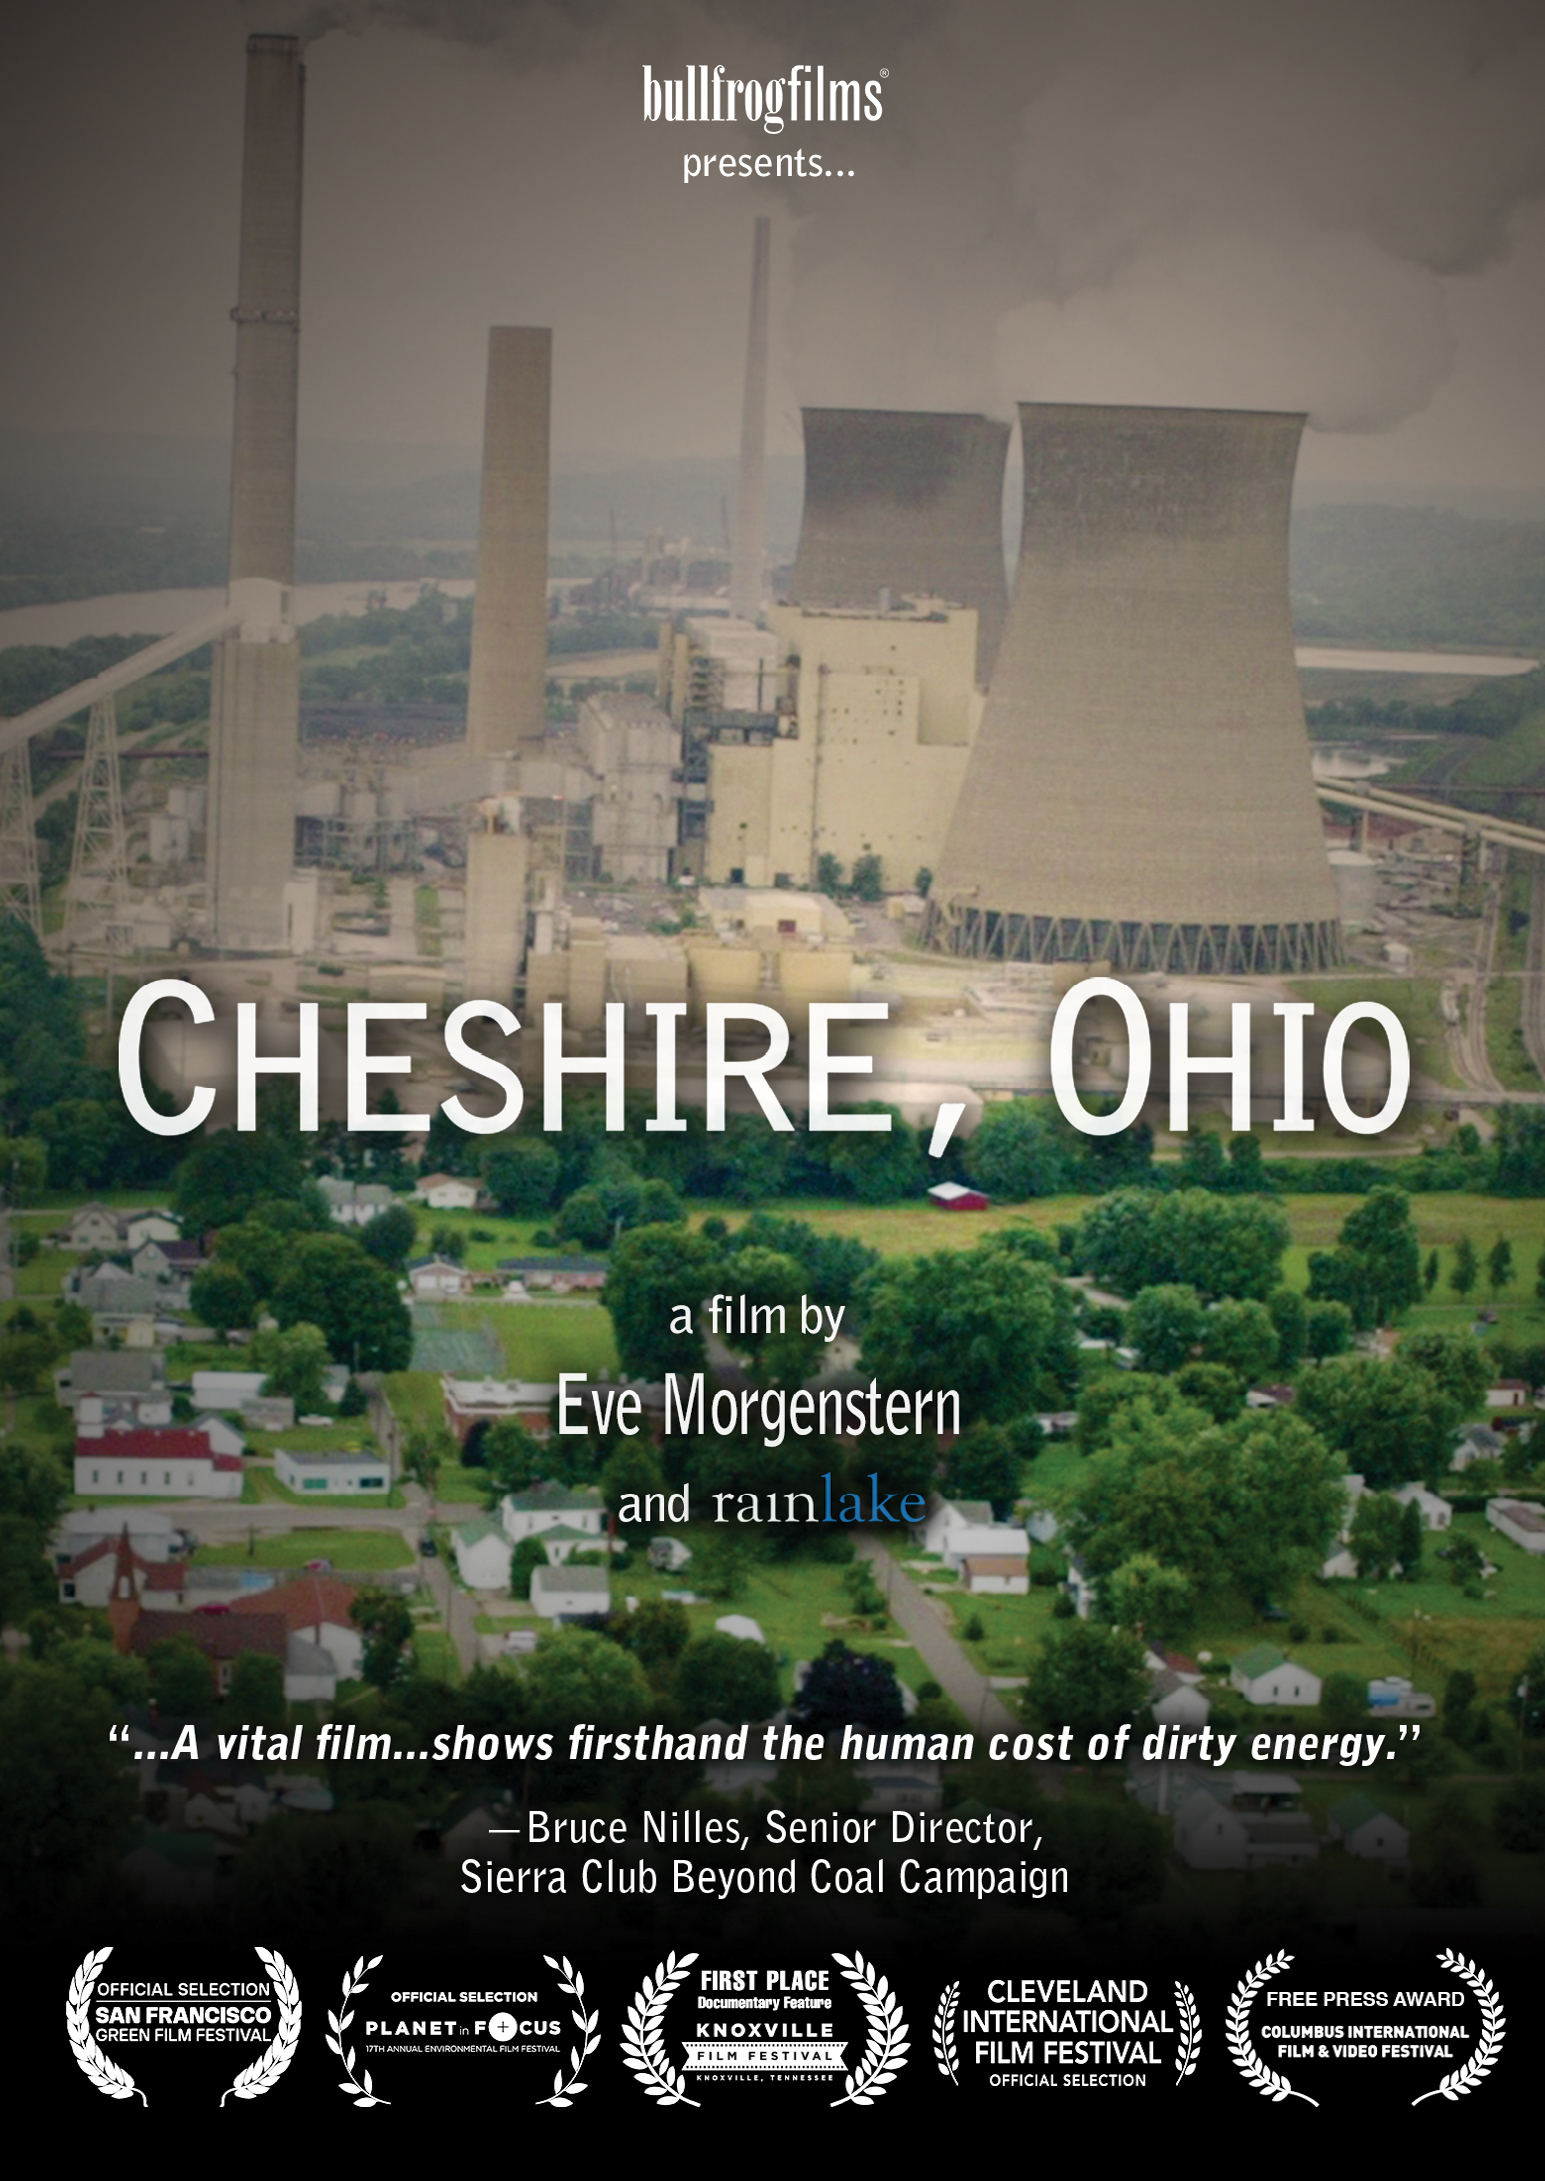 Cheshire, Ohio: An American Coal Story in 3 Acts